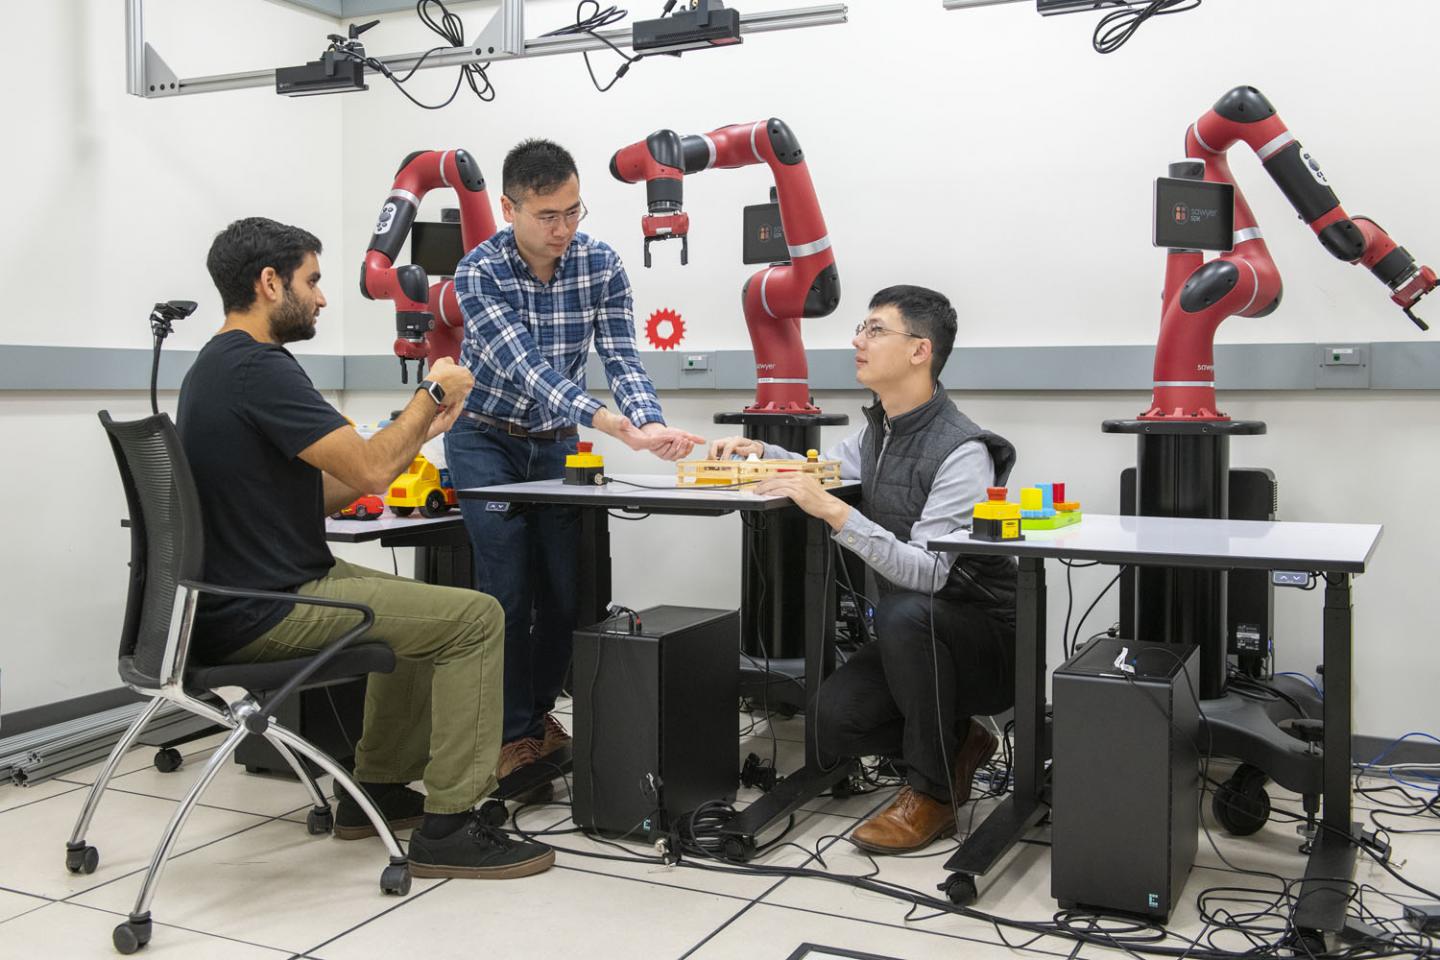 Using a handheld device, Ajay Mandelkar, Jim Fan and Yuke Zhu use their software to control a robot arm. Source: L.A. Cicero